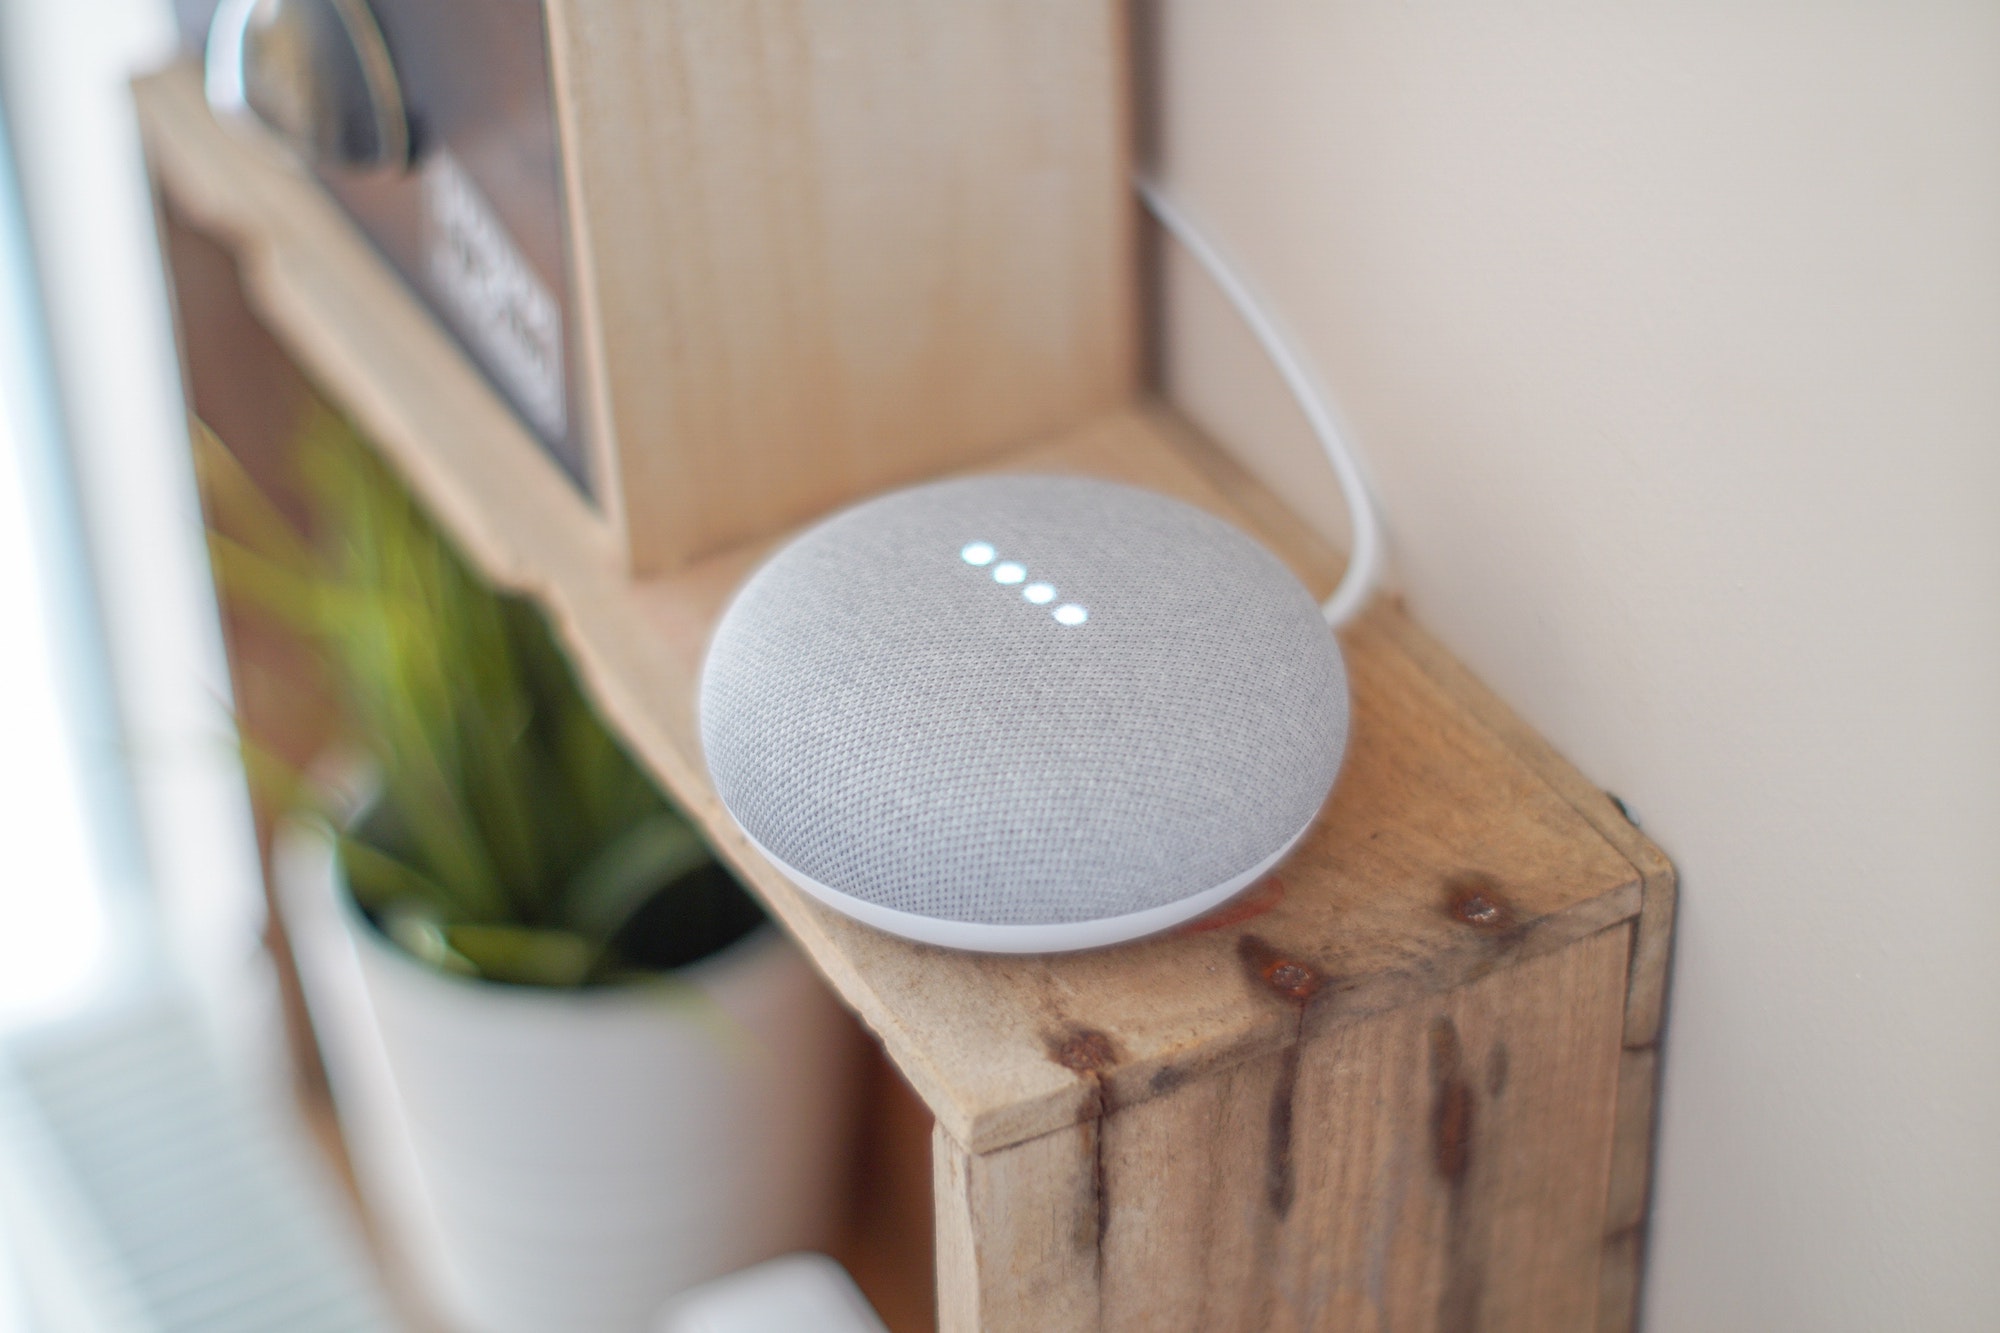 google smart home technology on table